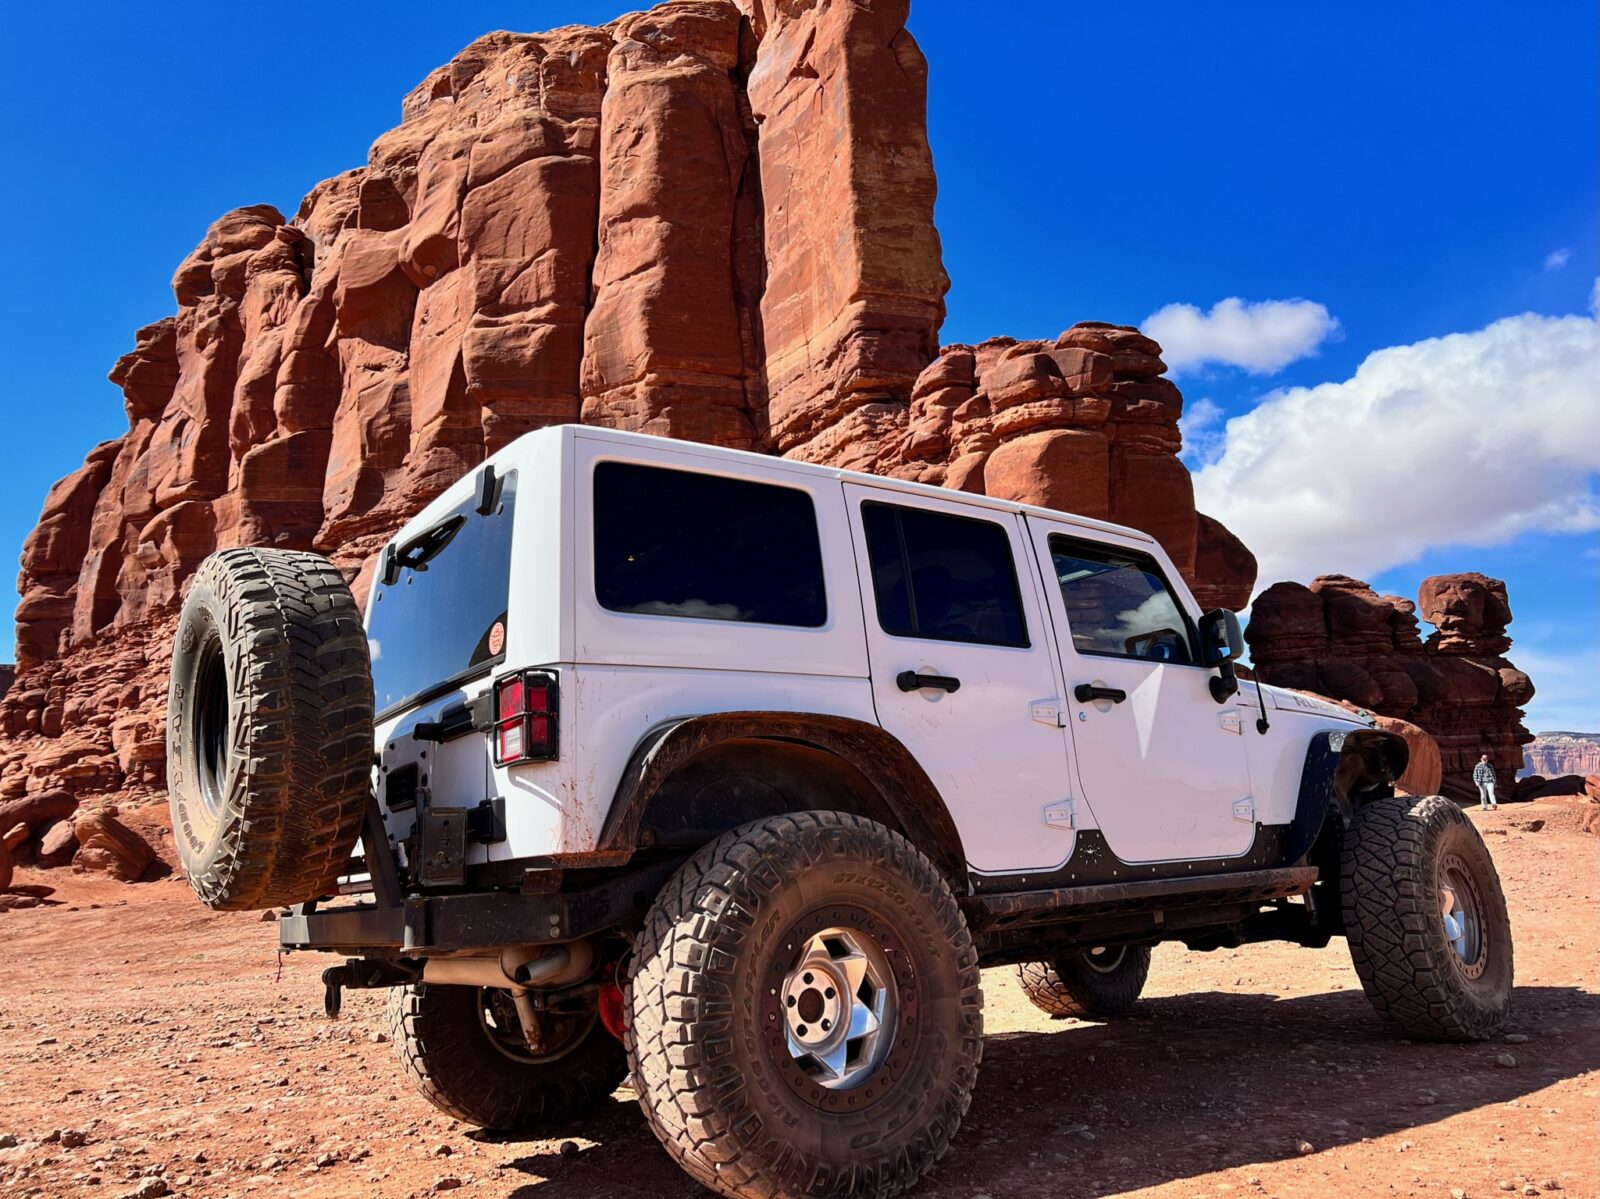 travis hoops onX offroad trail guide and his jeep in Moab